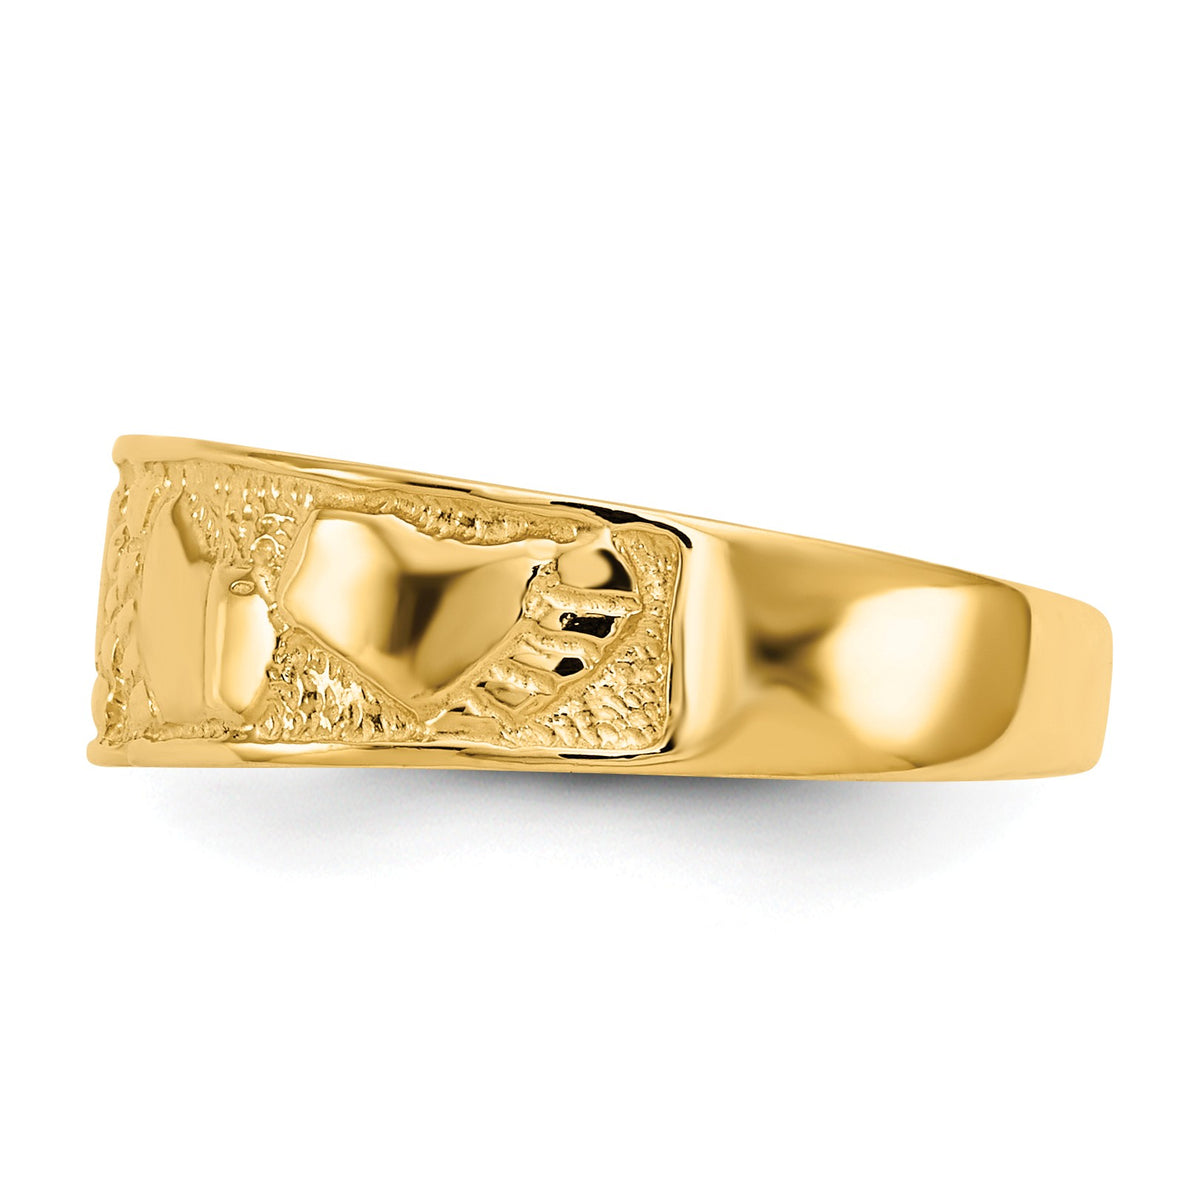 Alternate view of the Footprints Toe Ring in 14 Karat Gold by The Black Bow Jewelry Co.